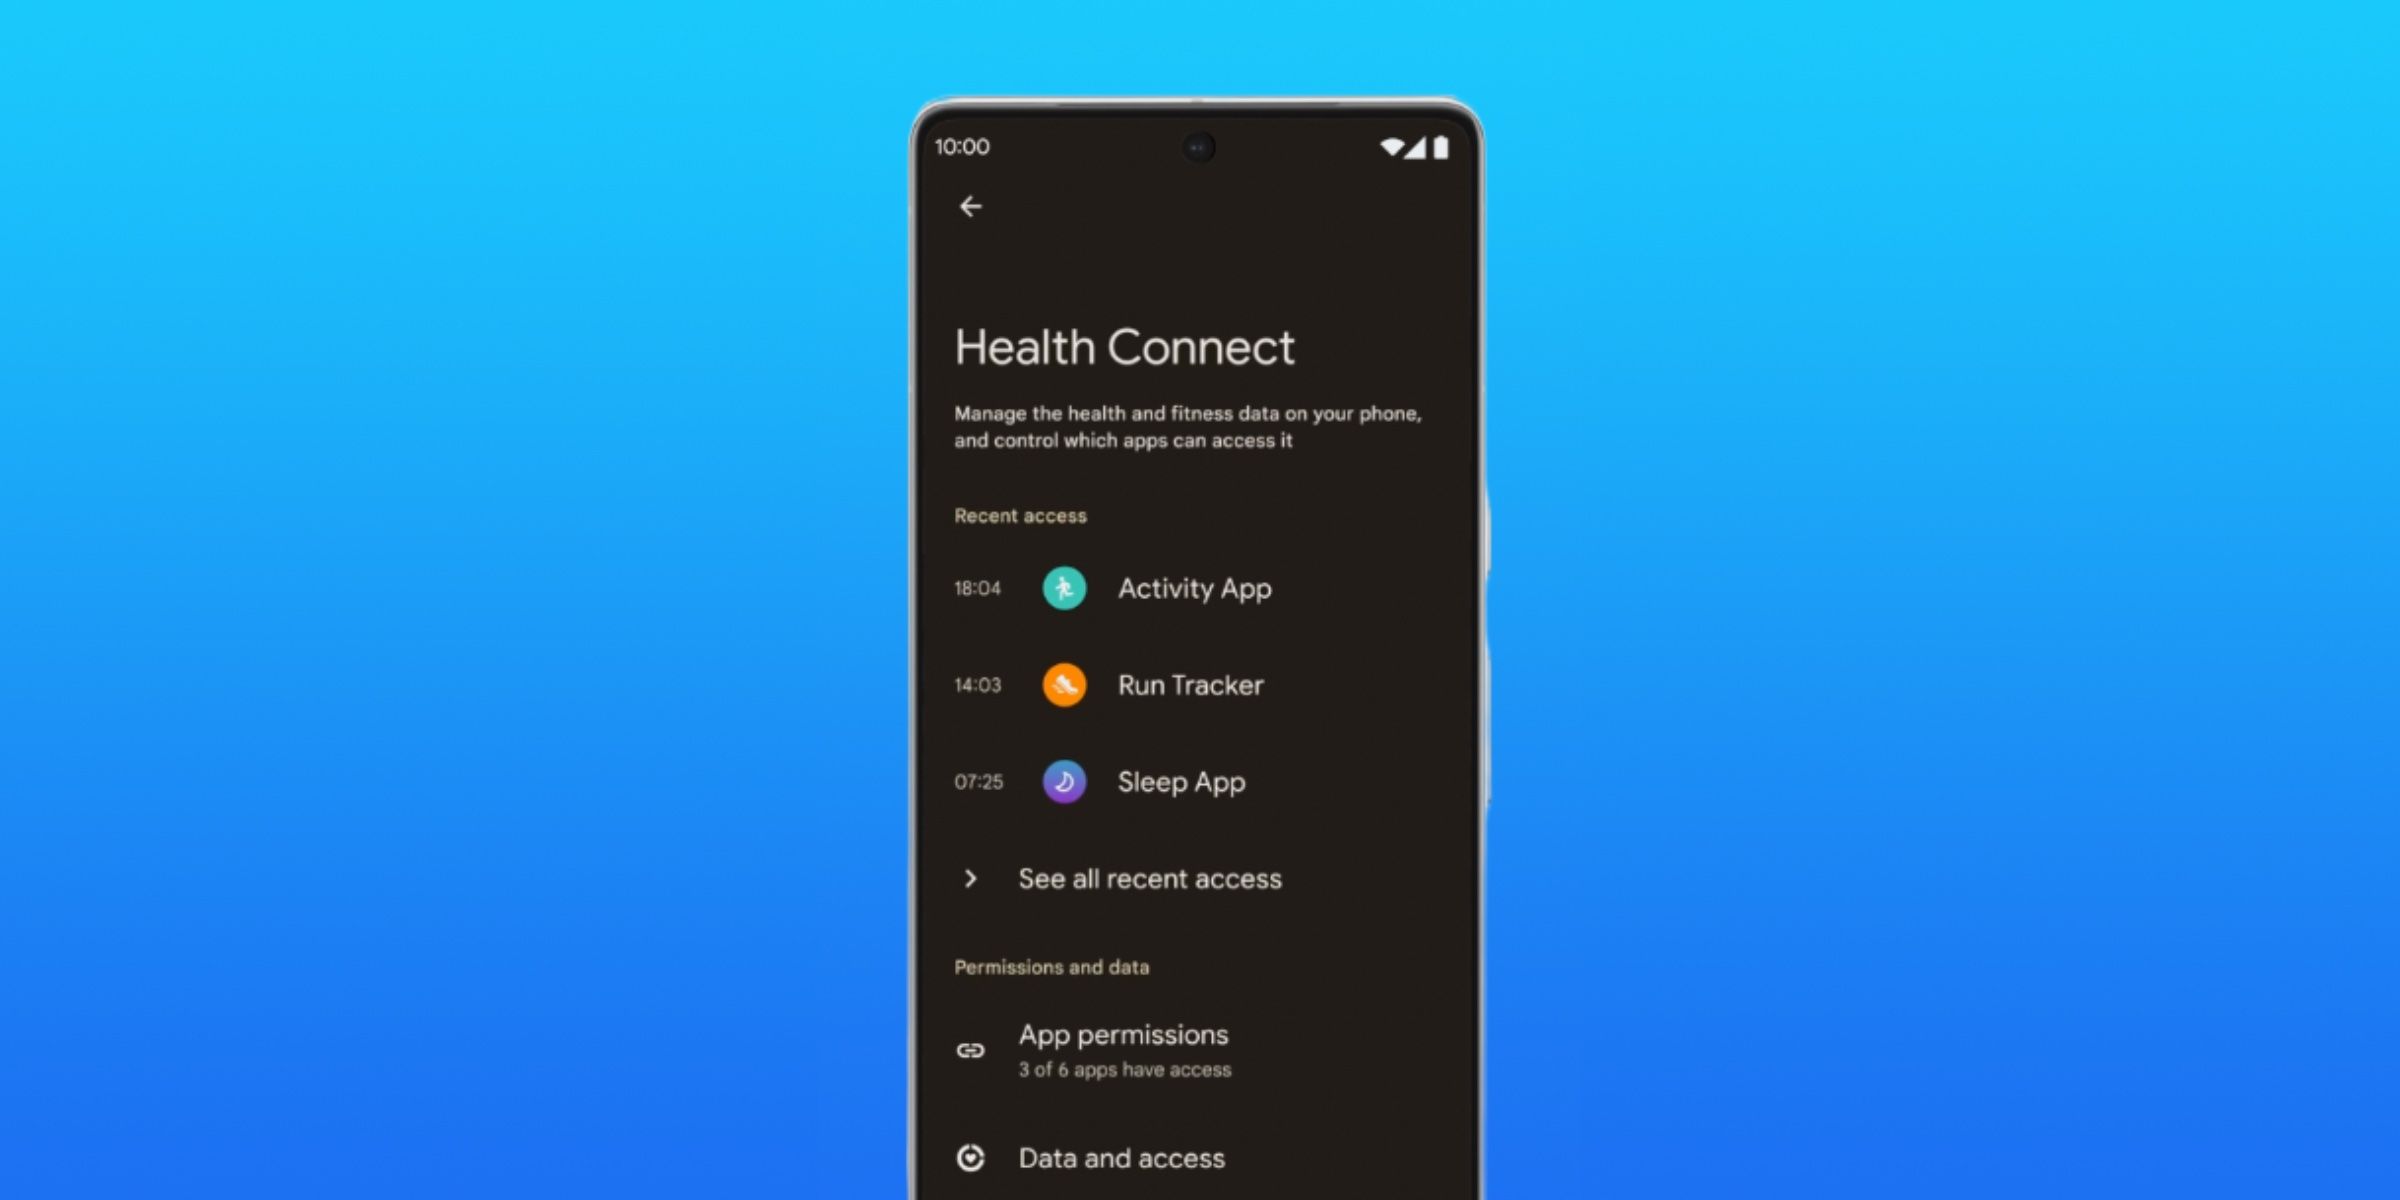 The Google Health Connect app on a Pixel smartphone.